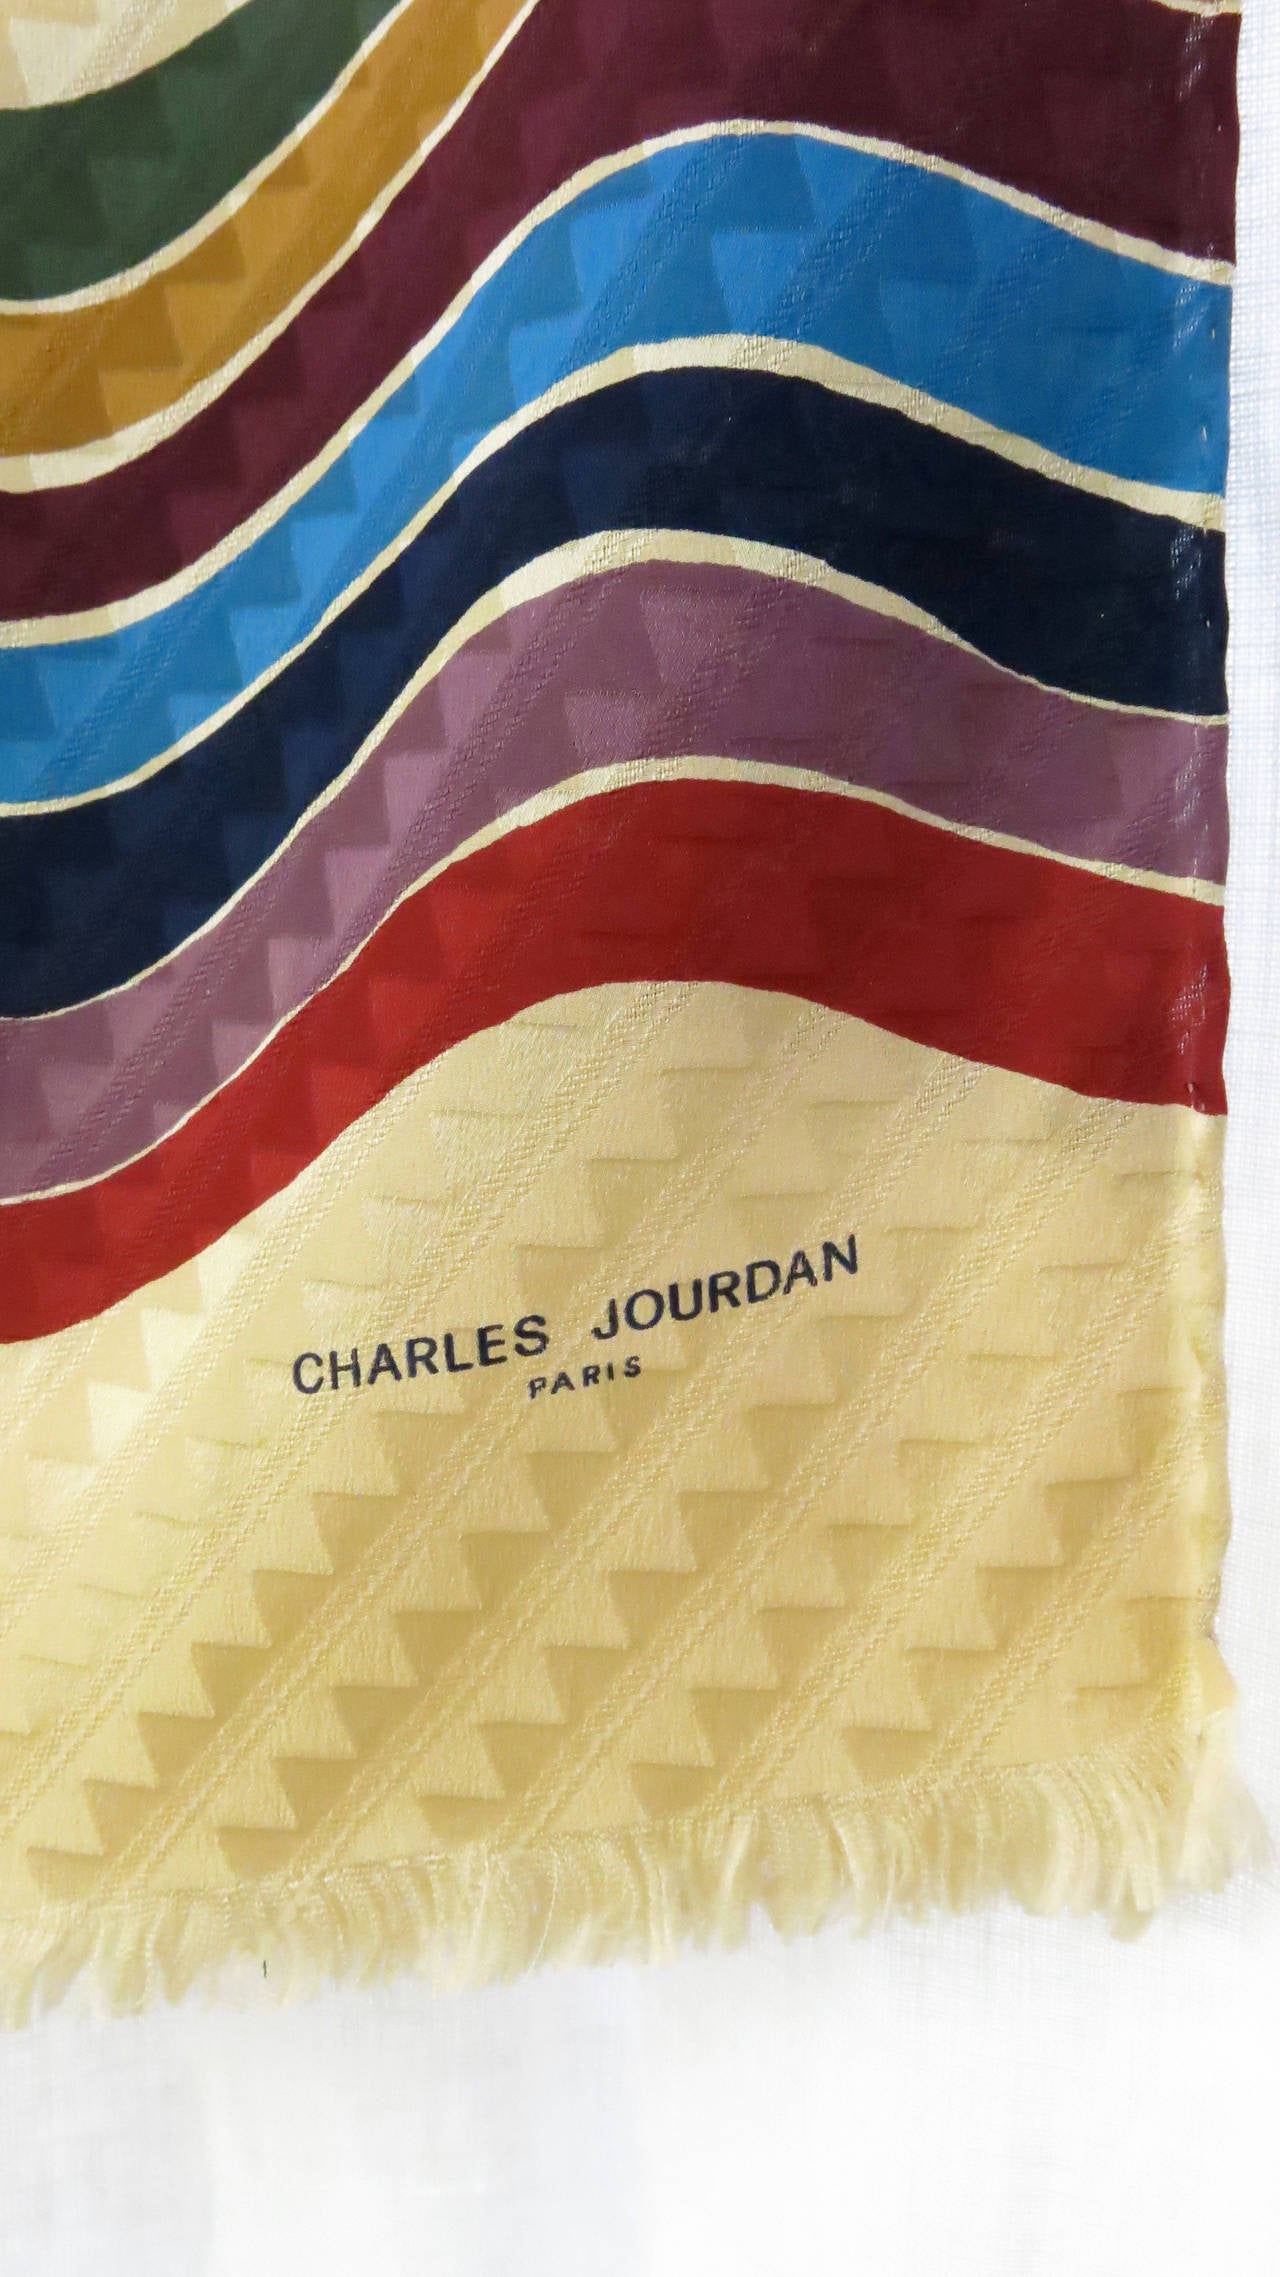 1970s silk scarf by Charles Jourdan, featuring rich hues in a wavy pattern and accented with fringed edges. 

*Please contact dealer prior to purchase for white glove shipping options*